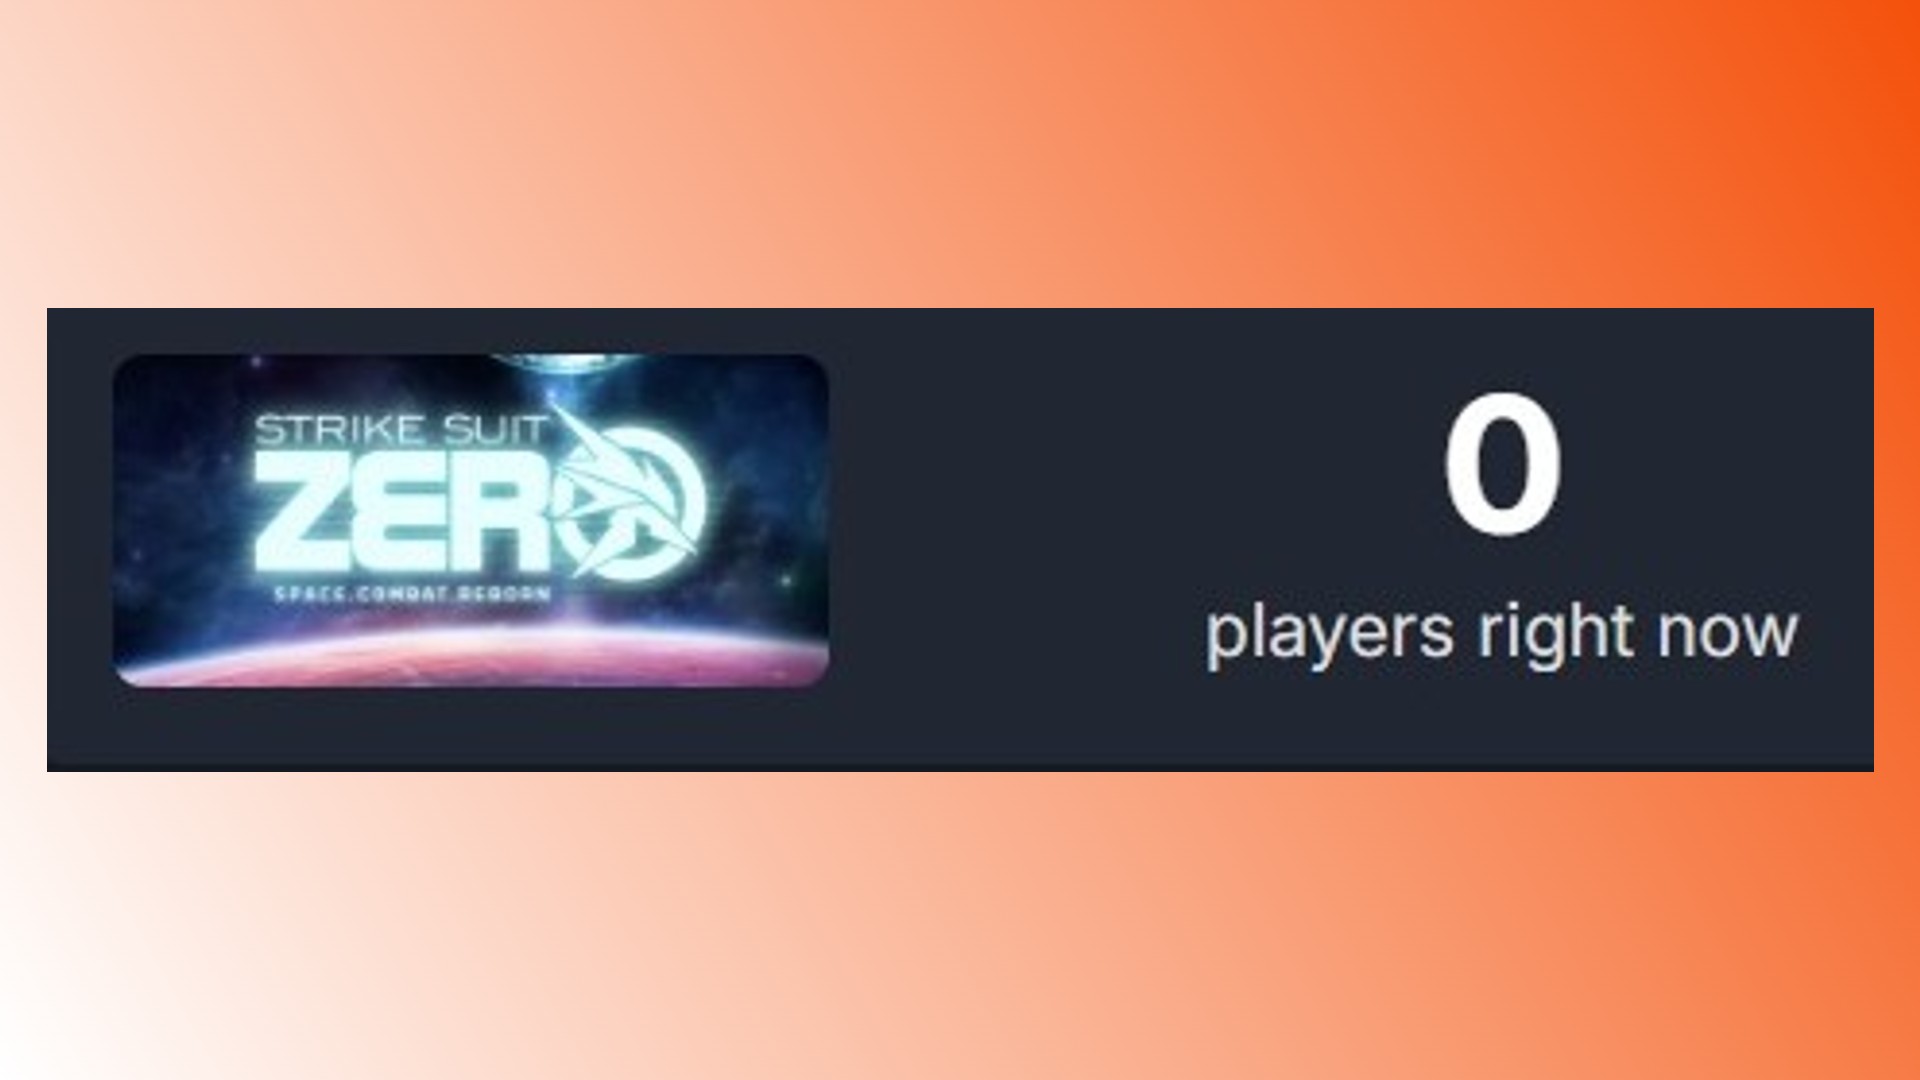 Steam games zero players: The Strike Suit Zero Steam player count, for the space game